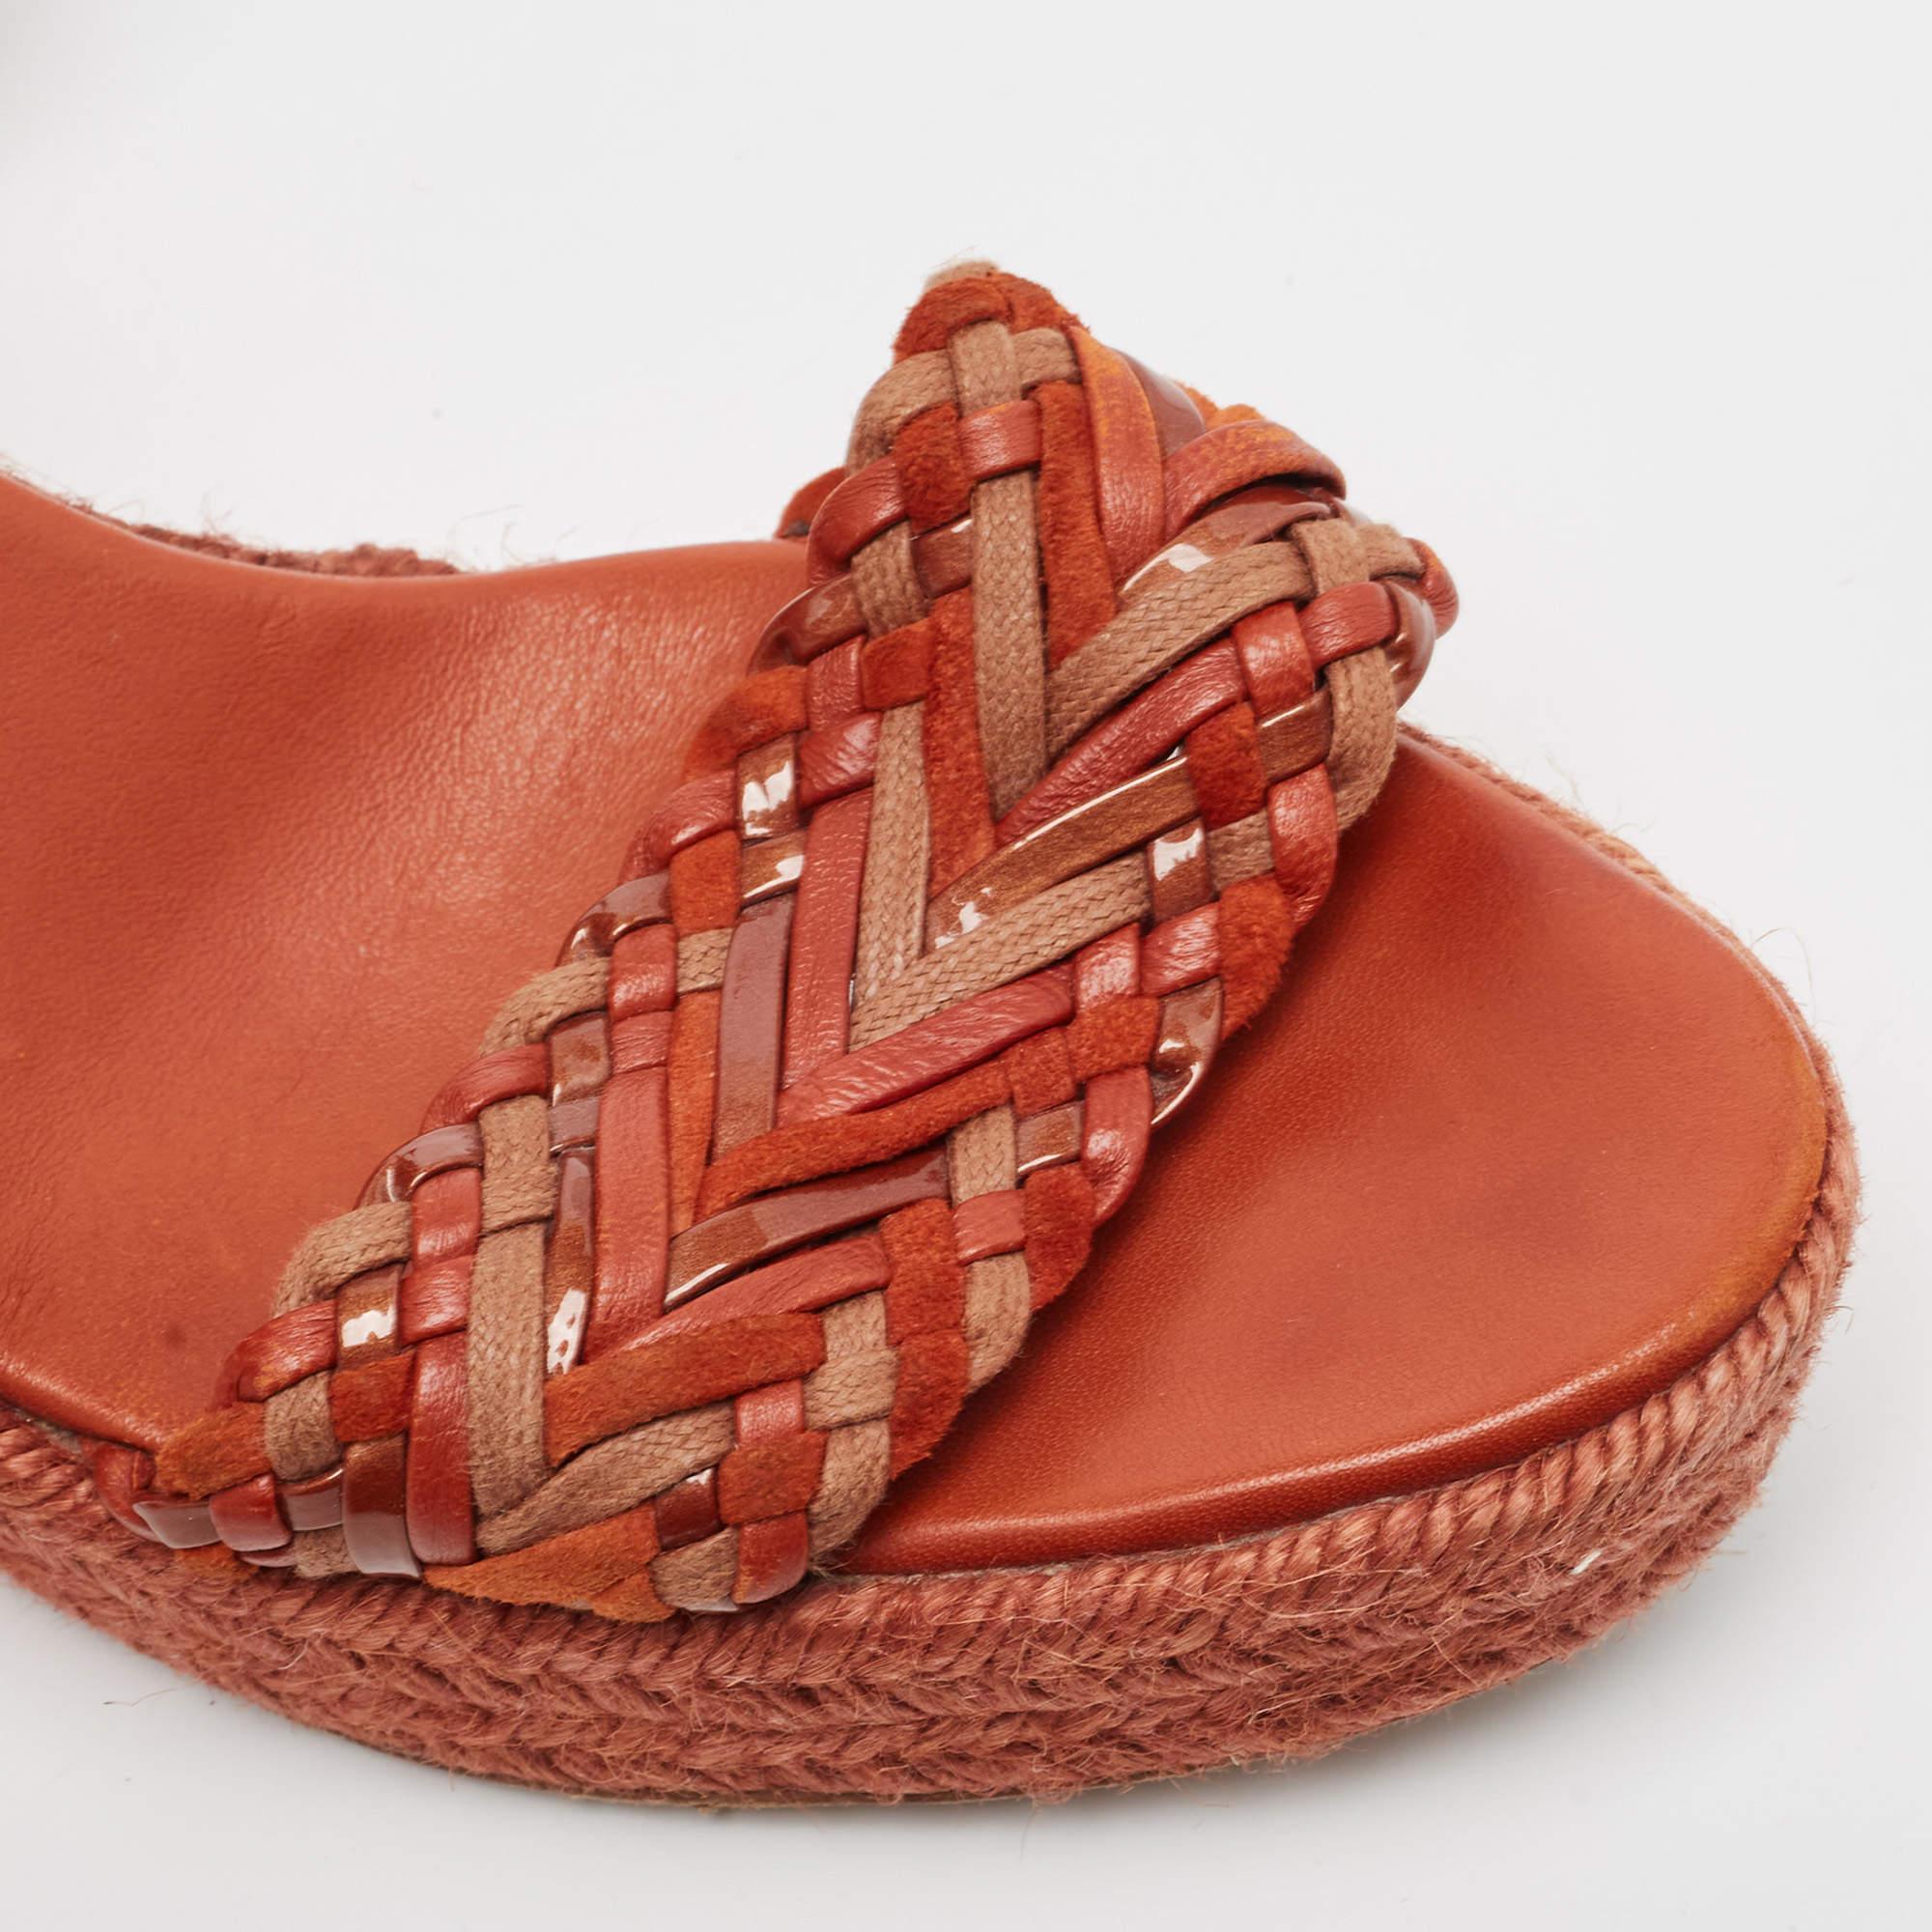 Hermes Brown Suede and Woven Wedge Espadrille Sandals Size 40 4